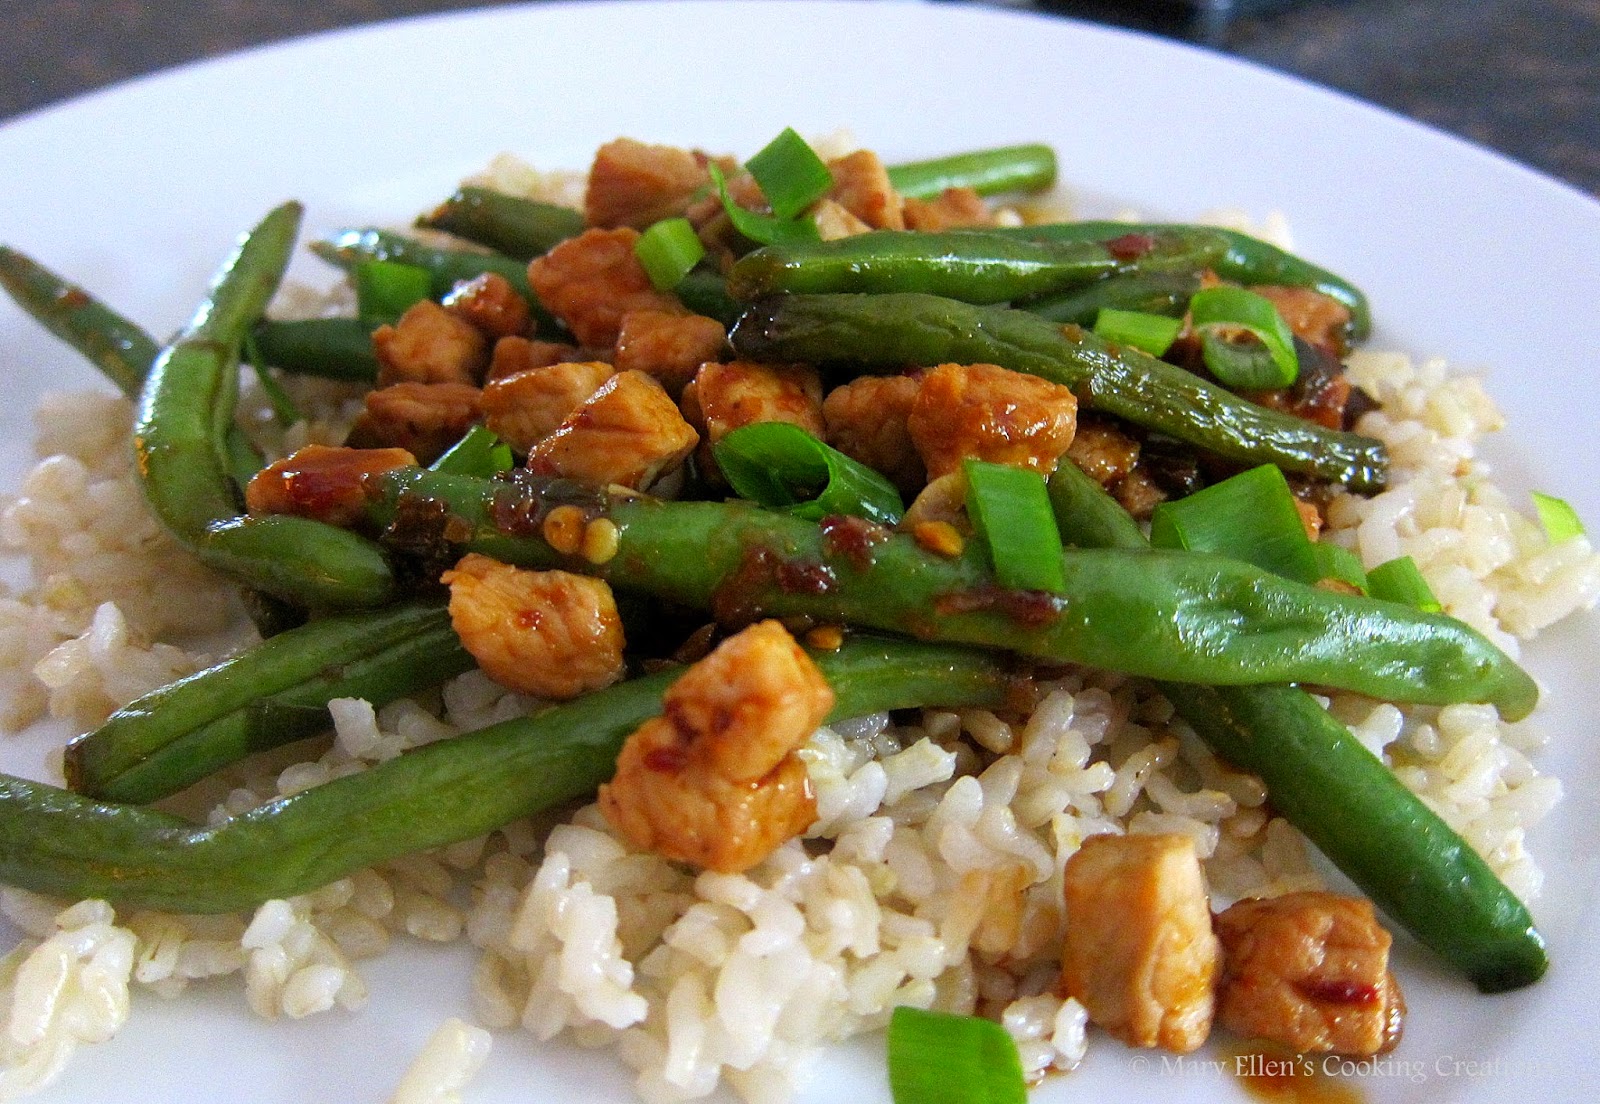 Mary Ellen's Cooking Creations Chinese Green Beans with Pork